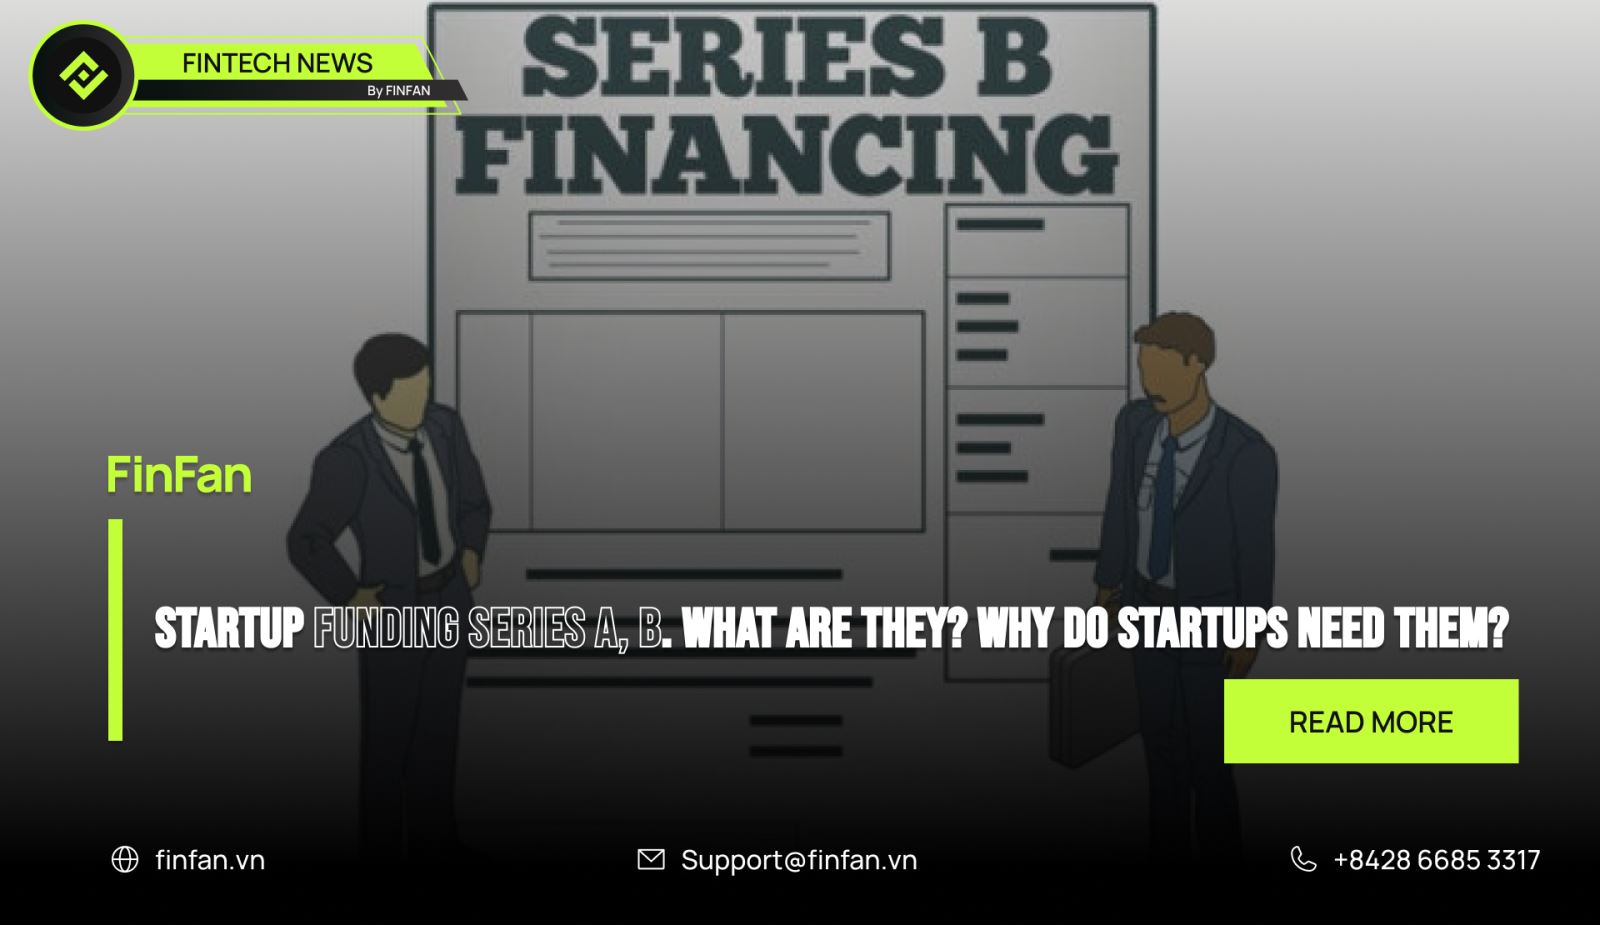 Startup funding series A, B. What are they? Why do startups need them?